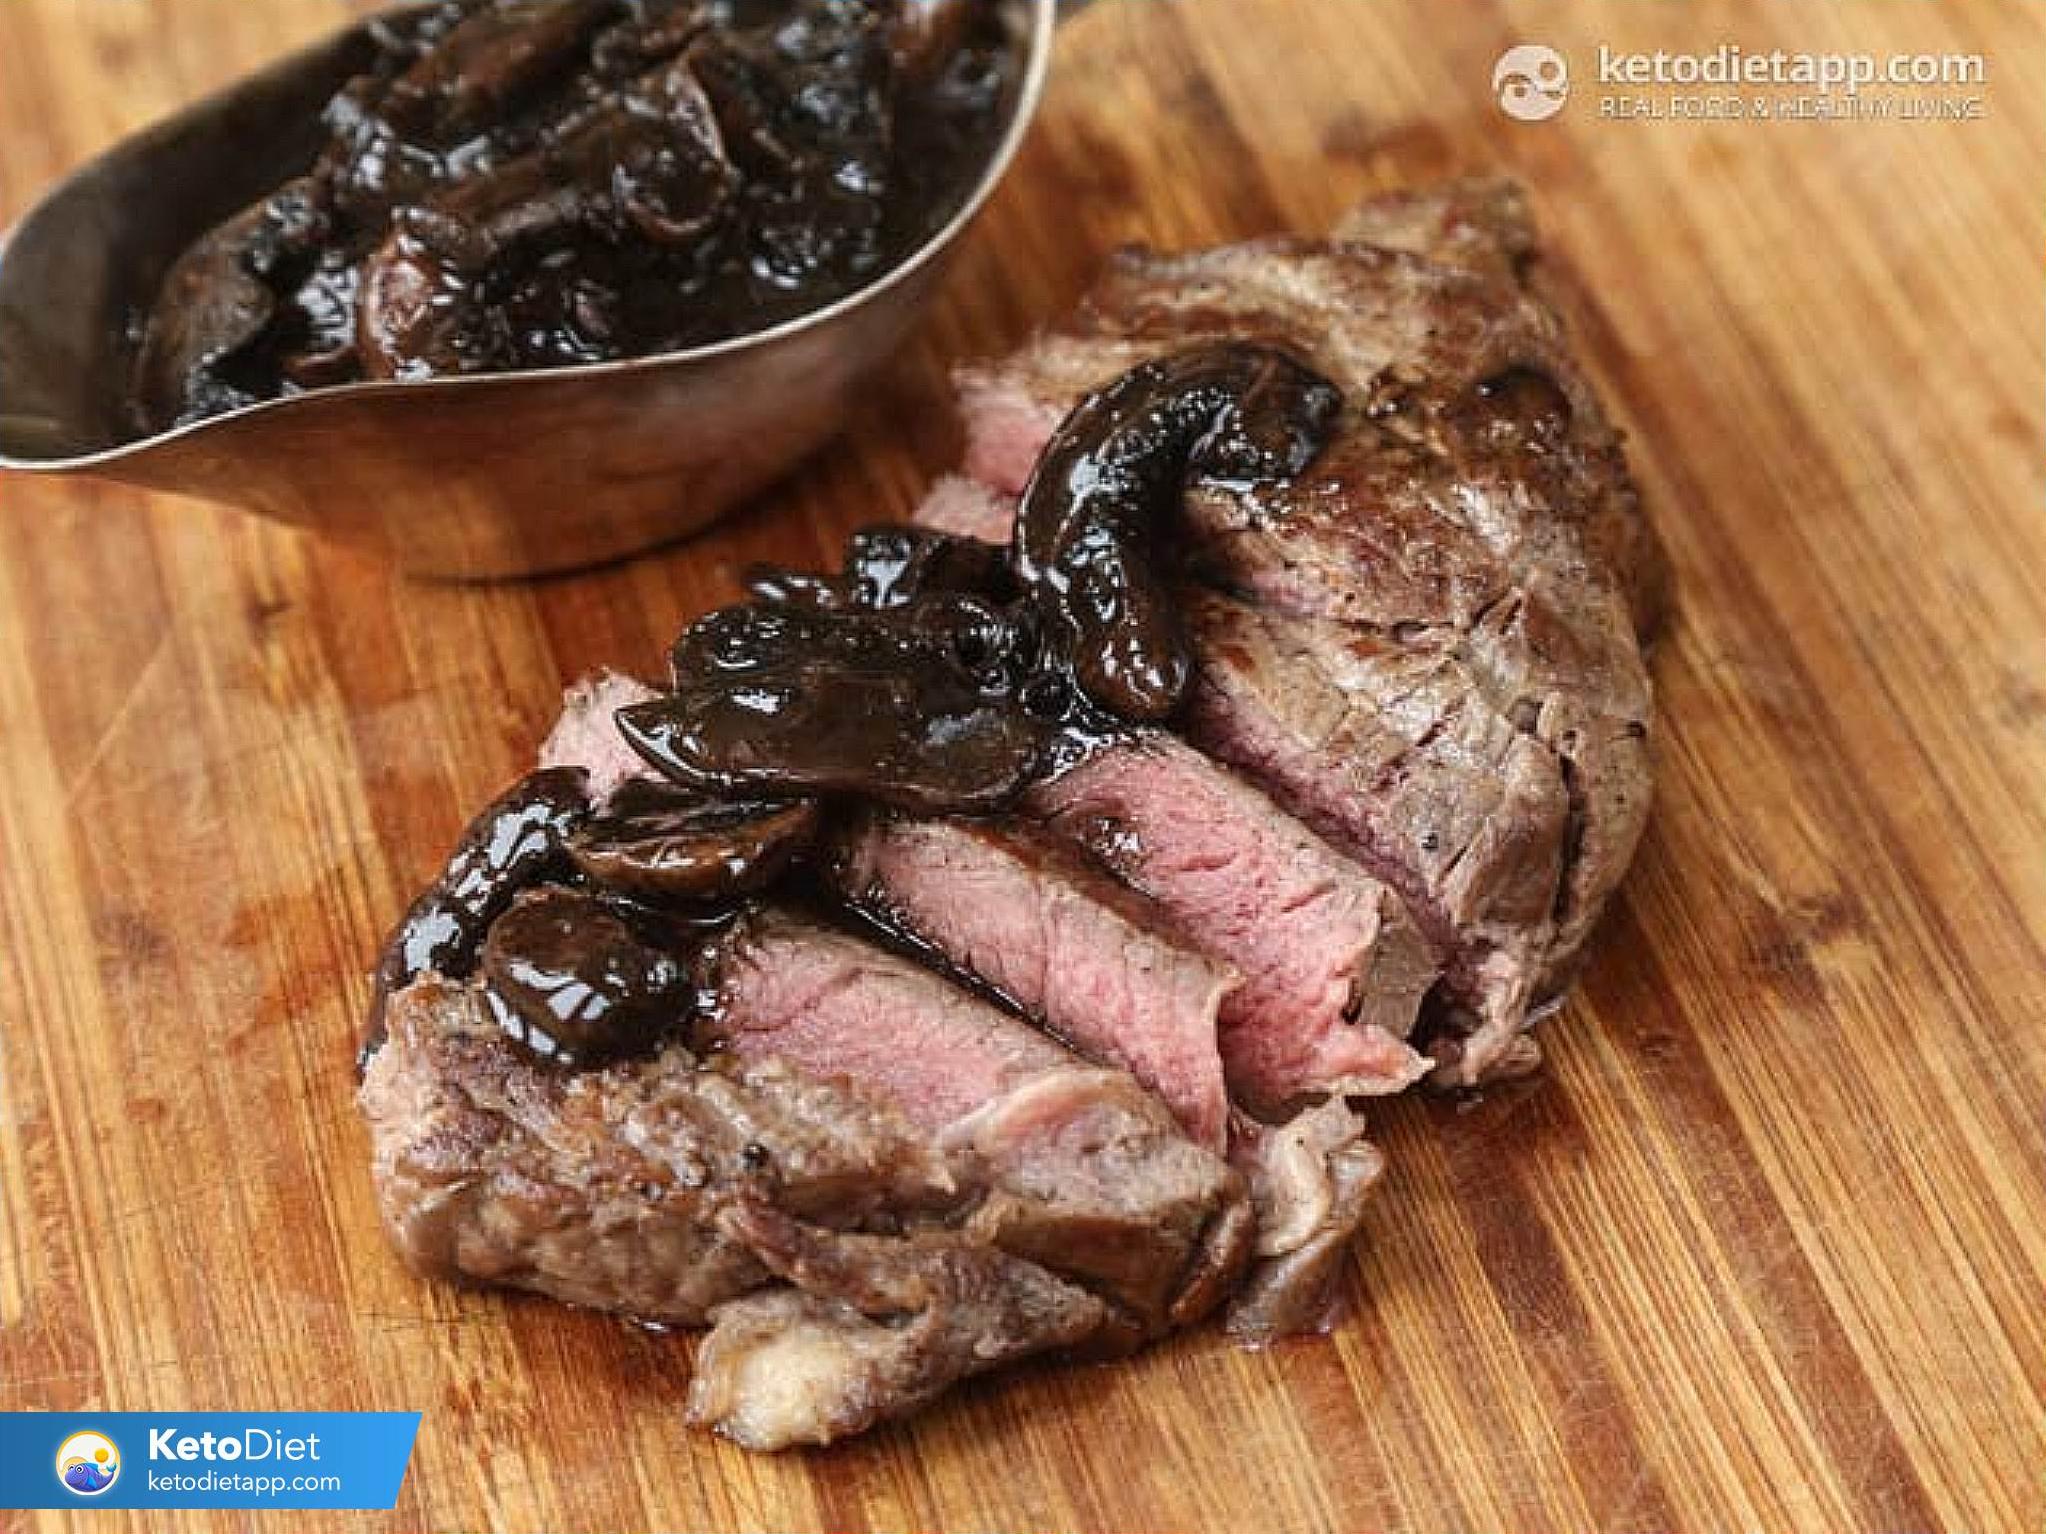 Low Carb Grilled Steak With Red Wine Sauce - 0 Net Carbs